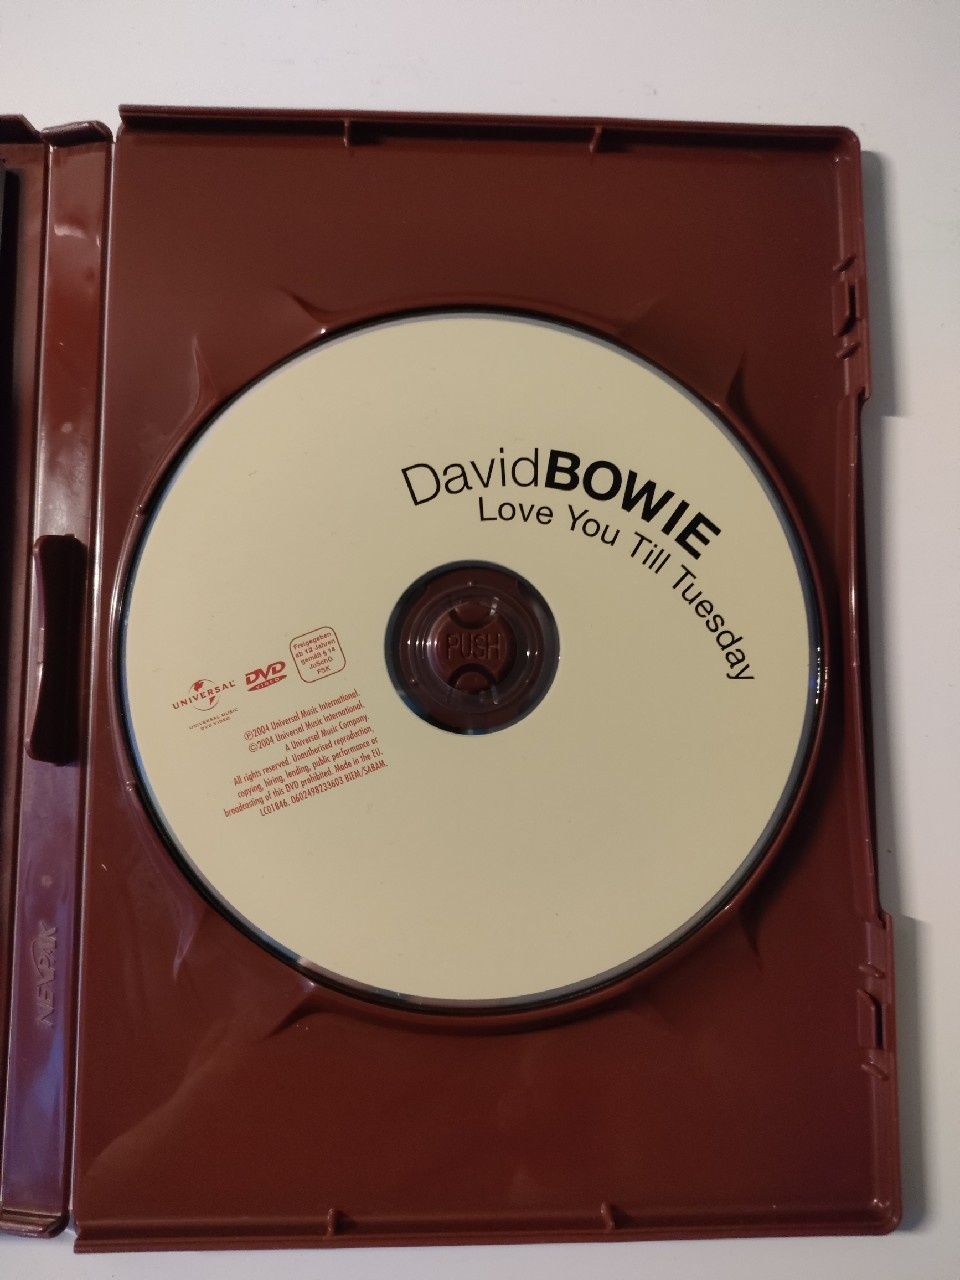 Dawid Bowie "Love you till tuesday" DVD